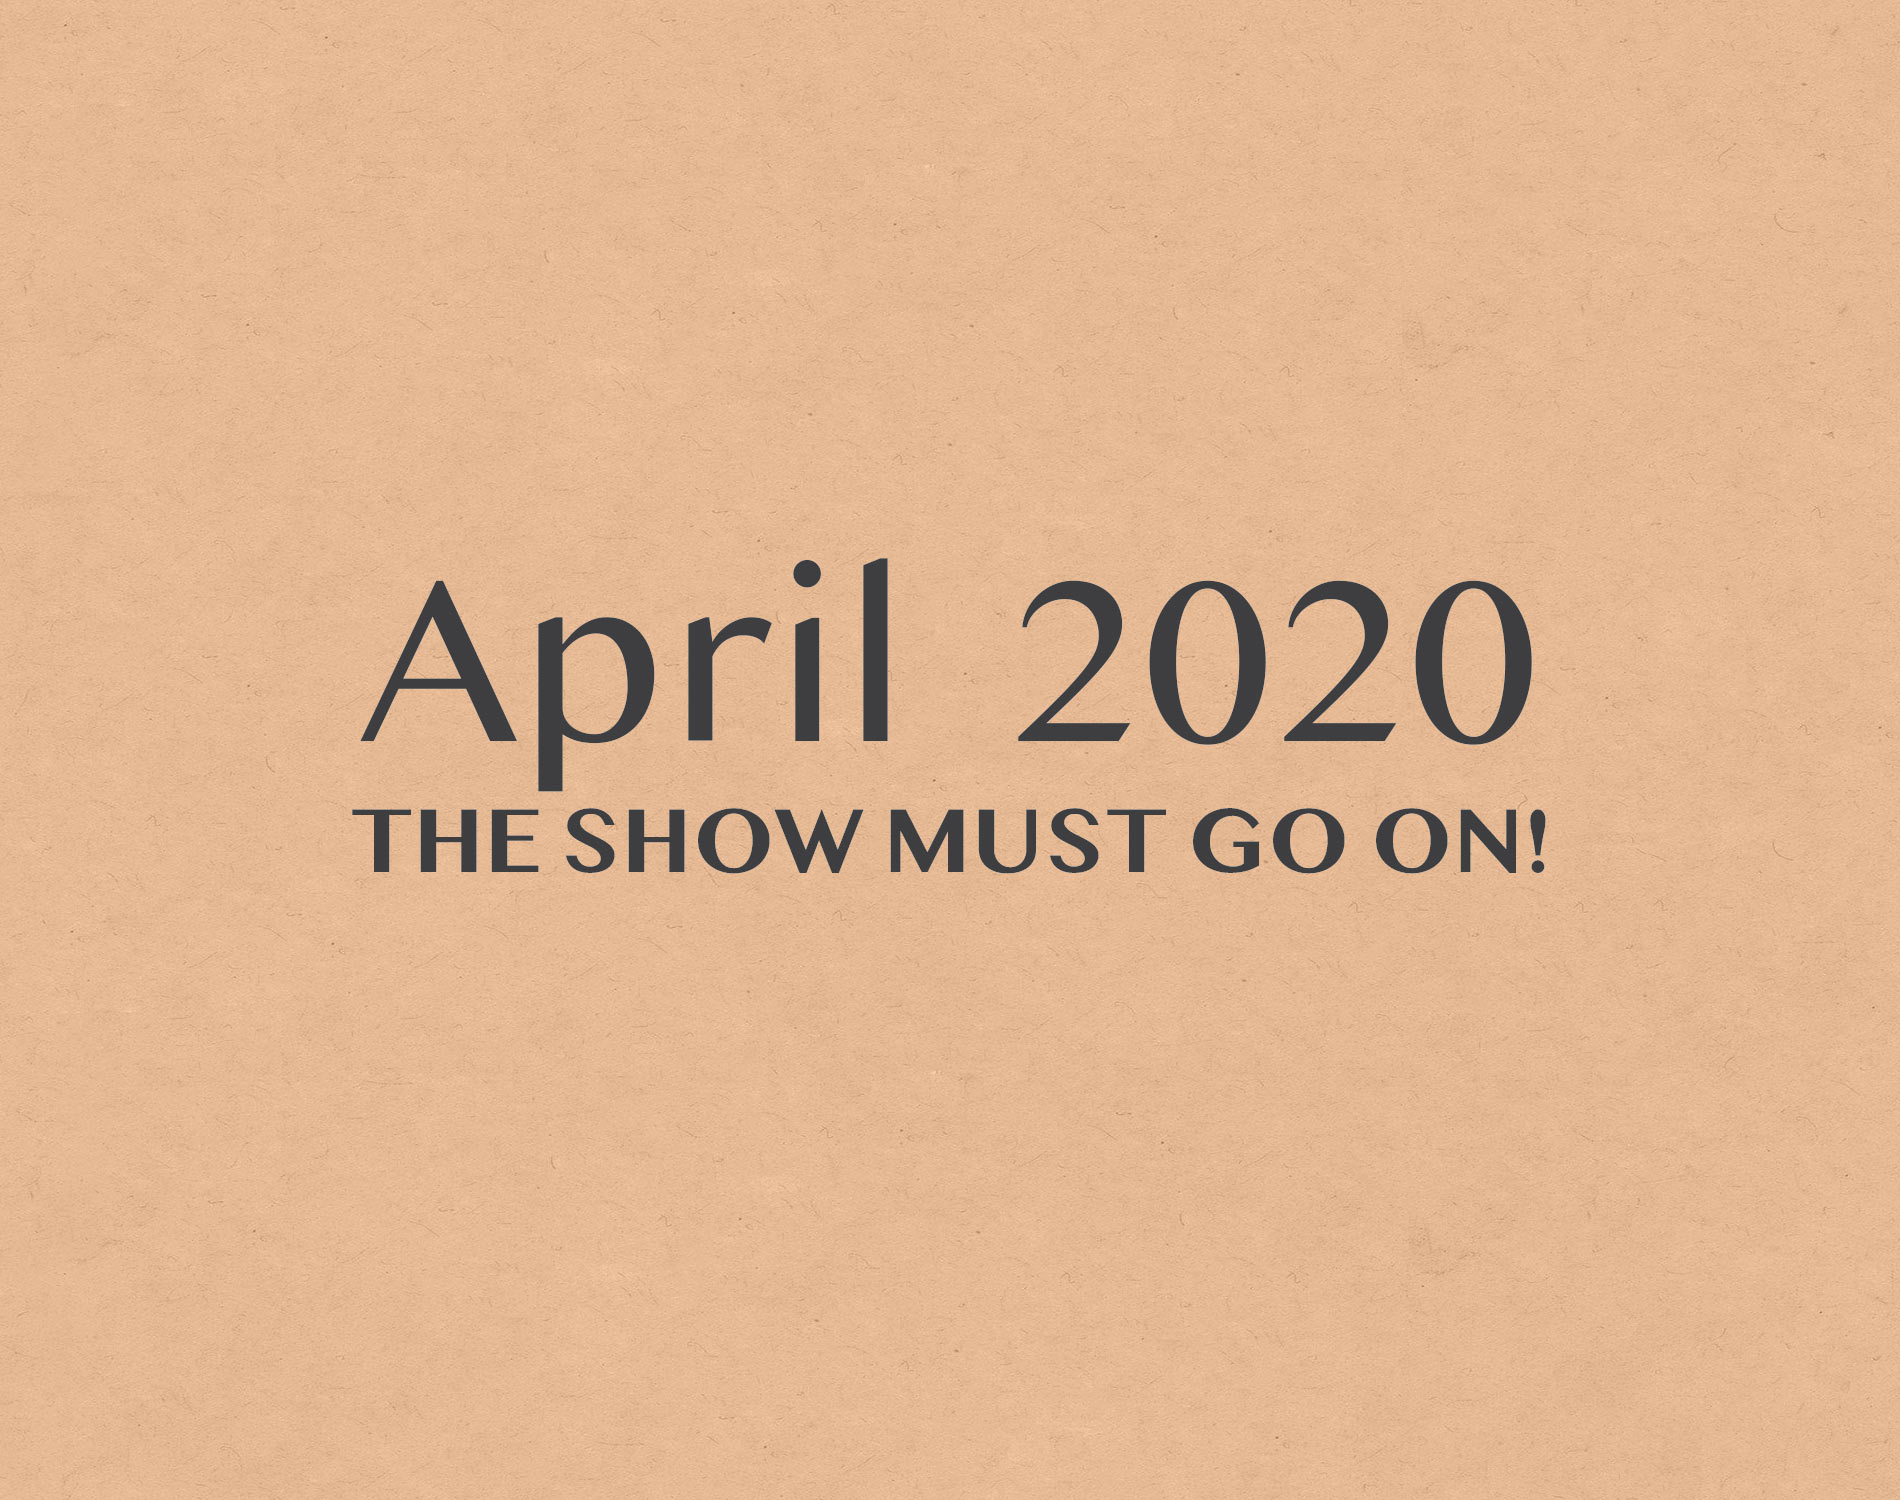 Abril 2020. The show must go on!